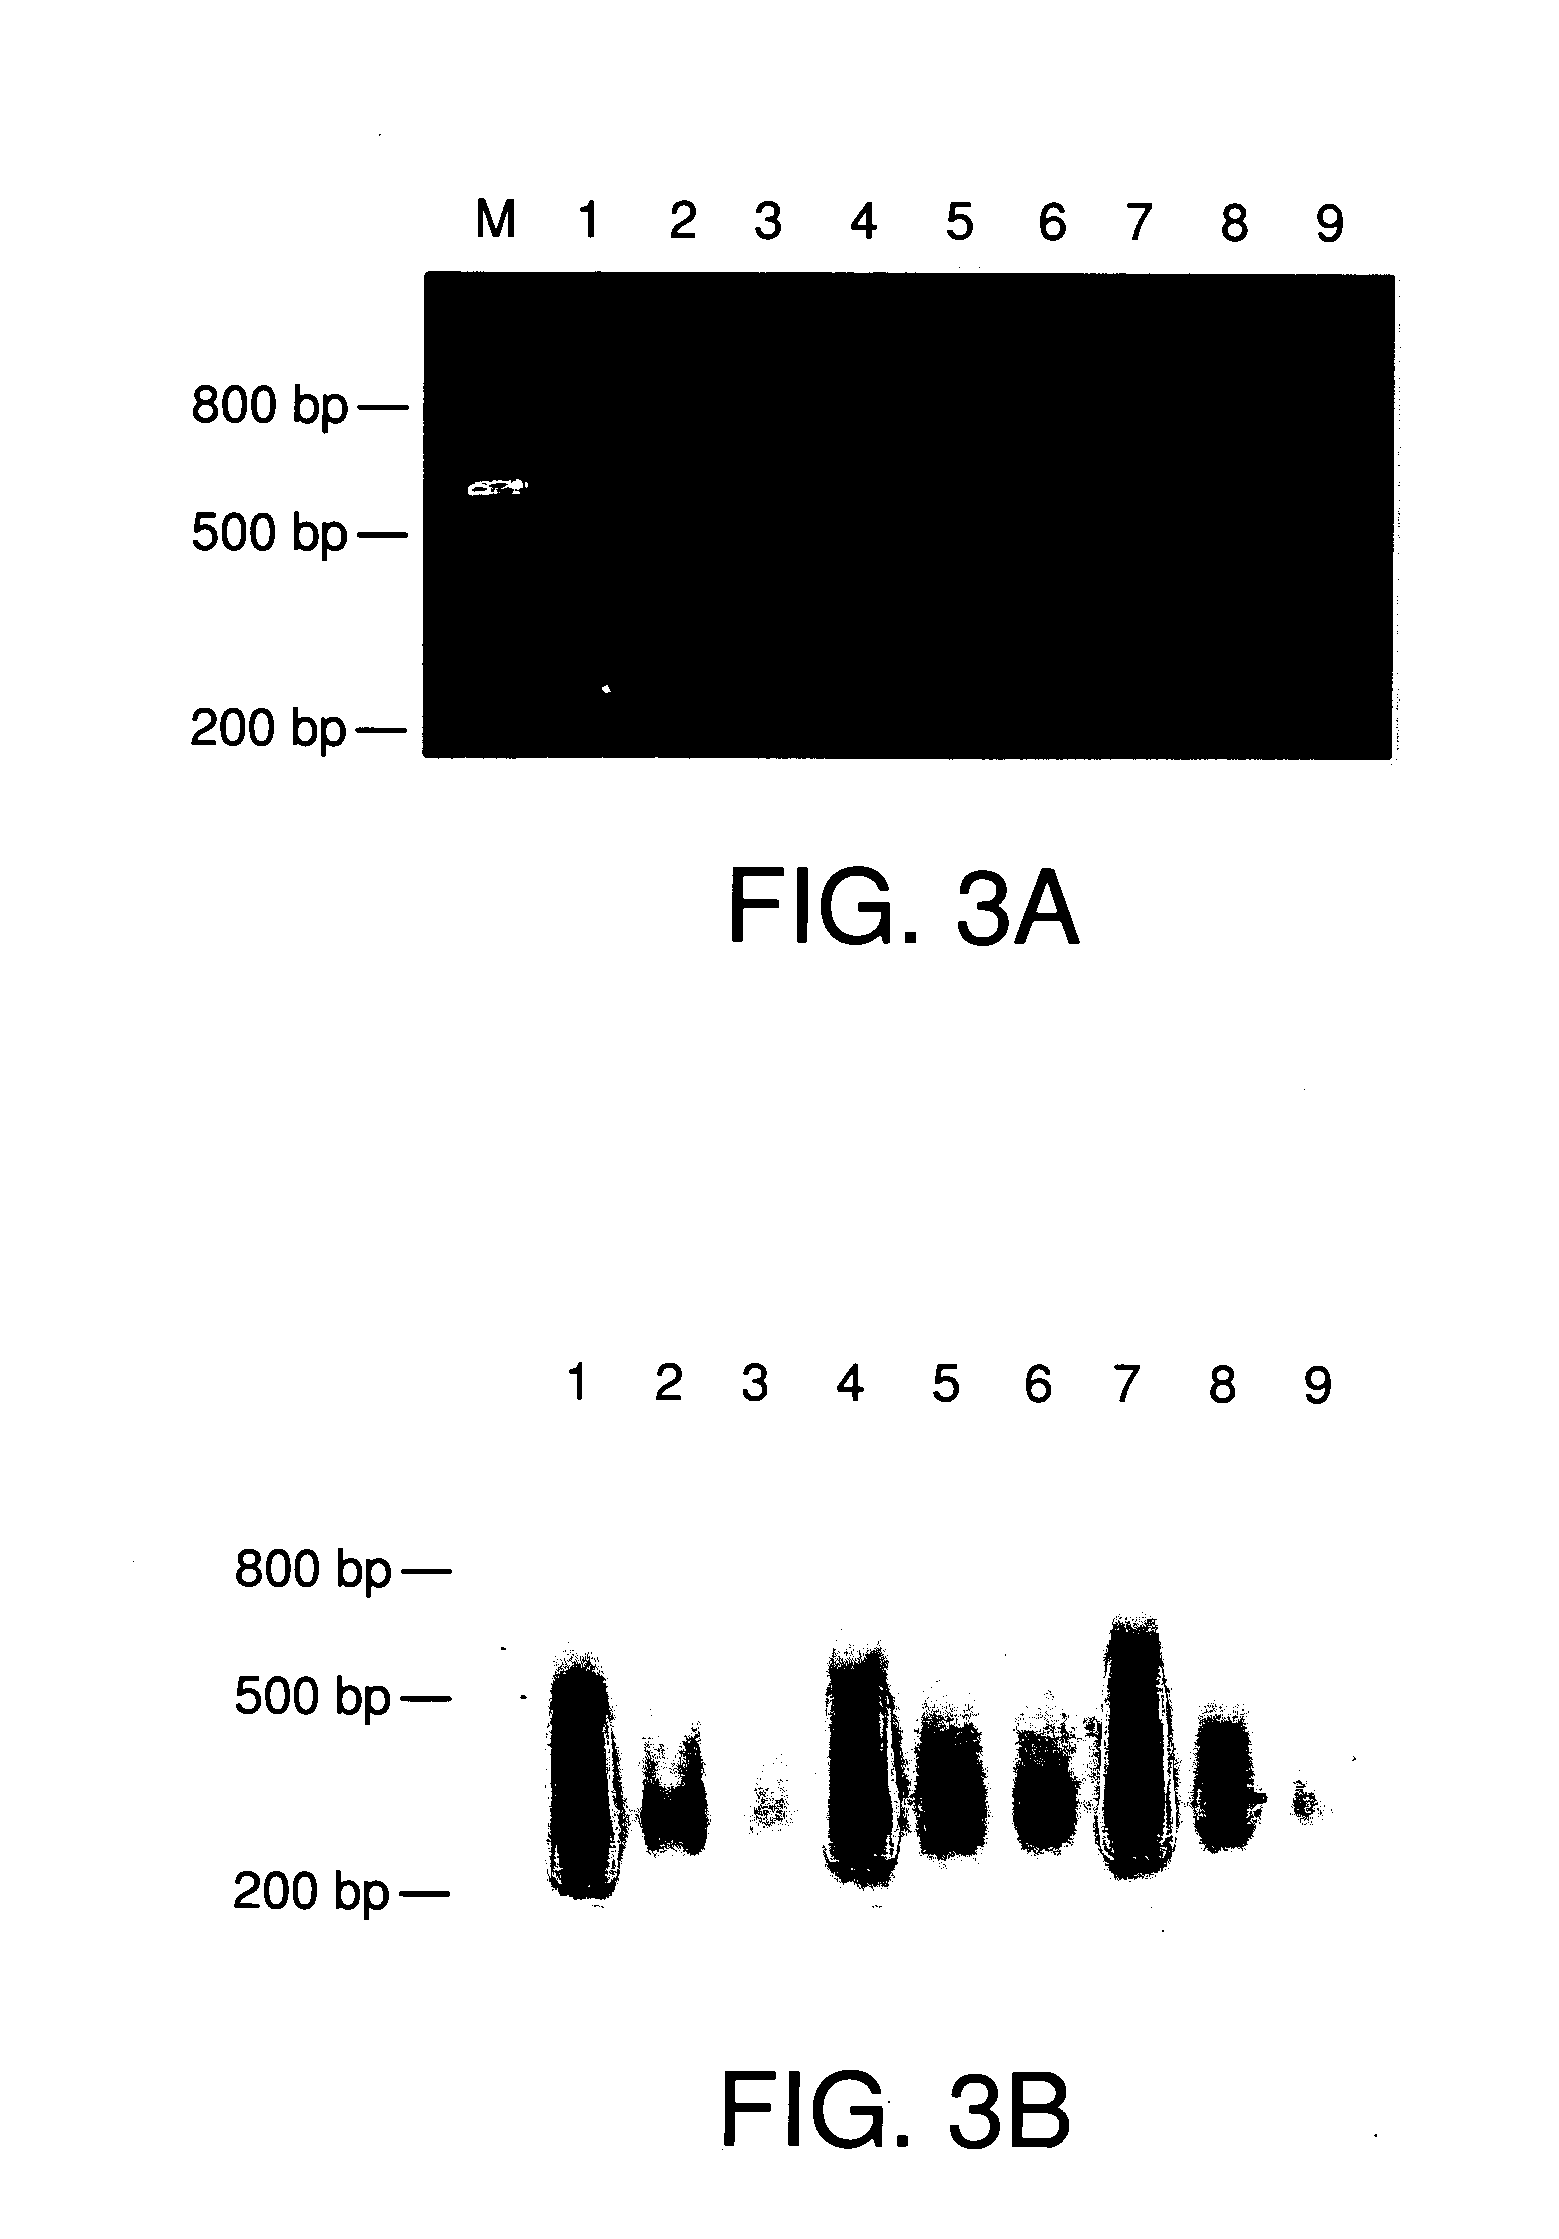 Methods of making repetitive sequences removed probes and uses thereof